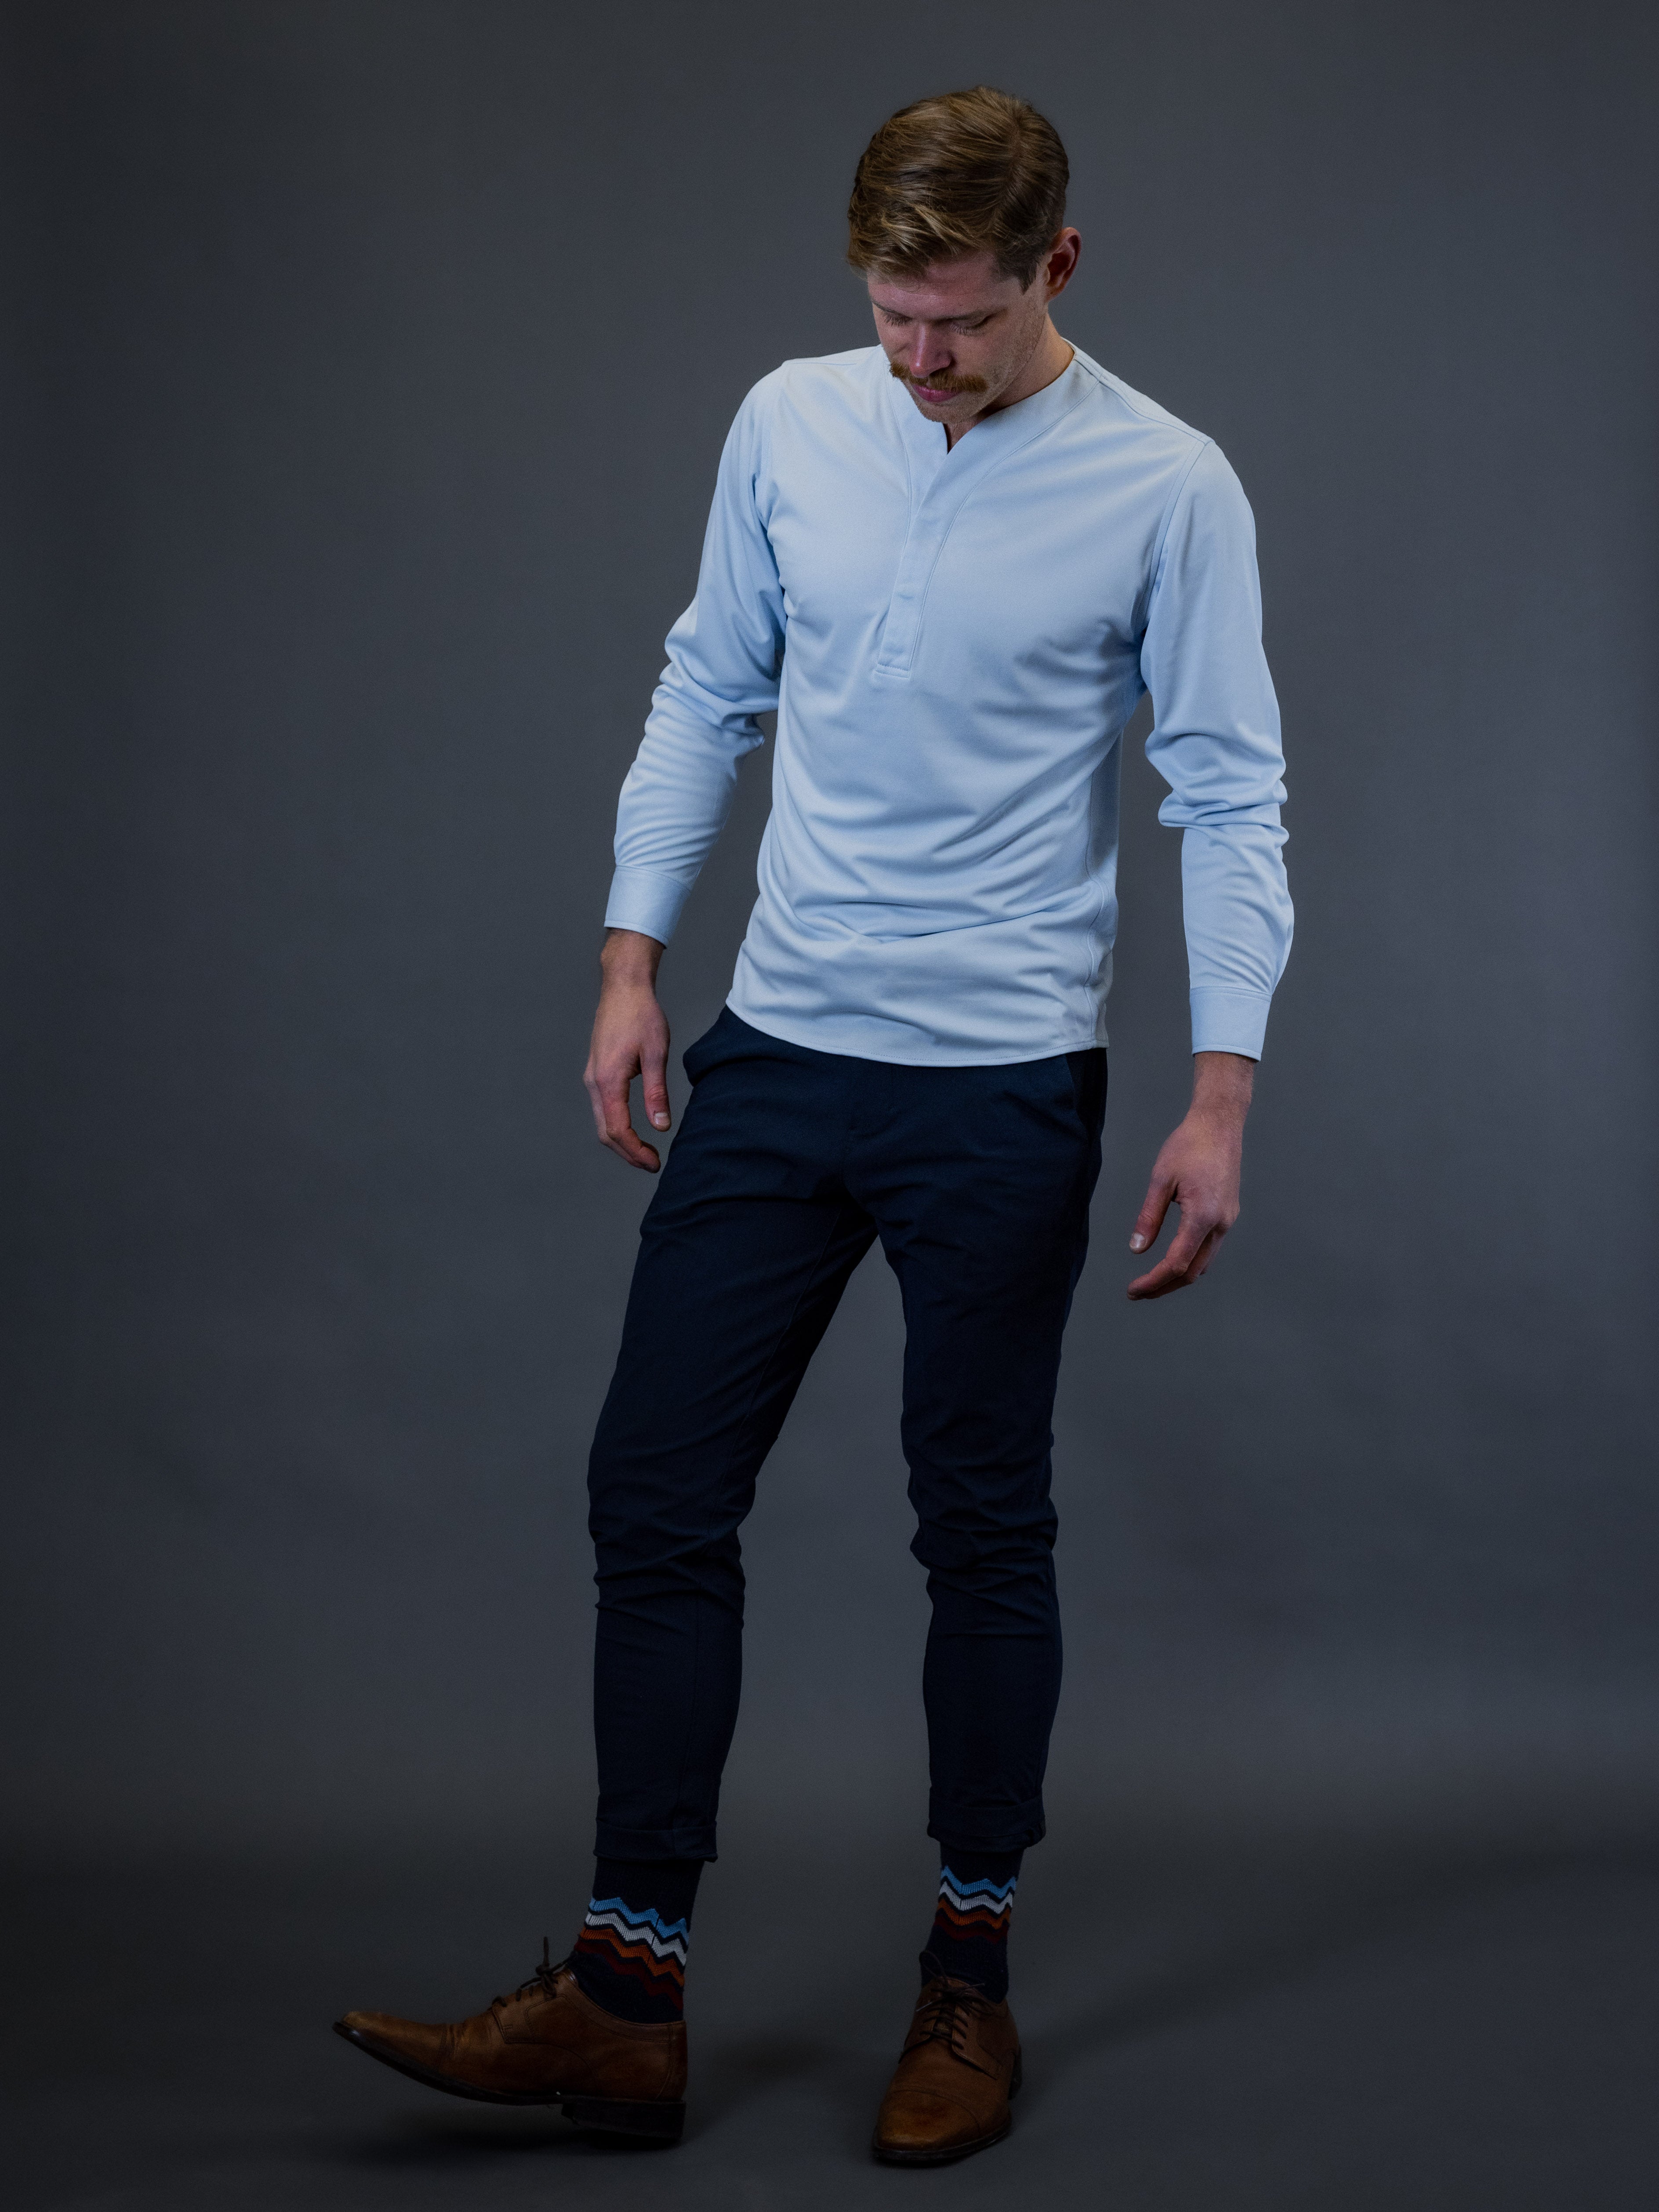 Male model wearing a light blue collarless dress shirt with long pants and dress shoes 